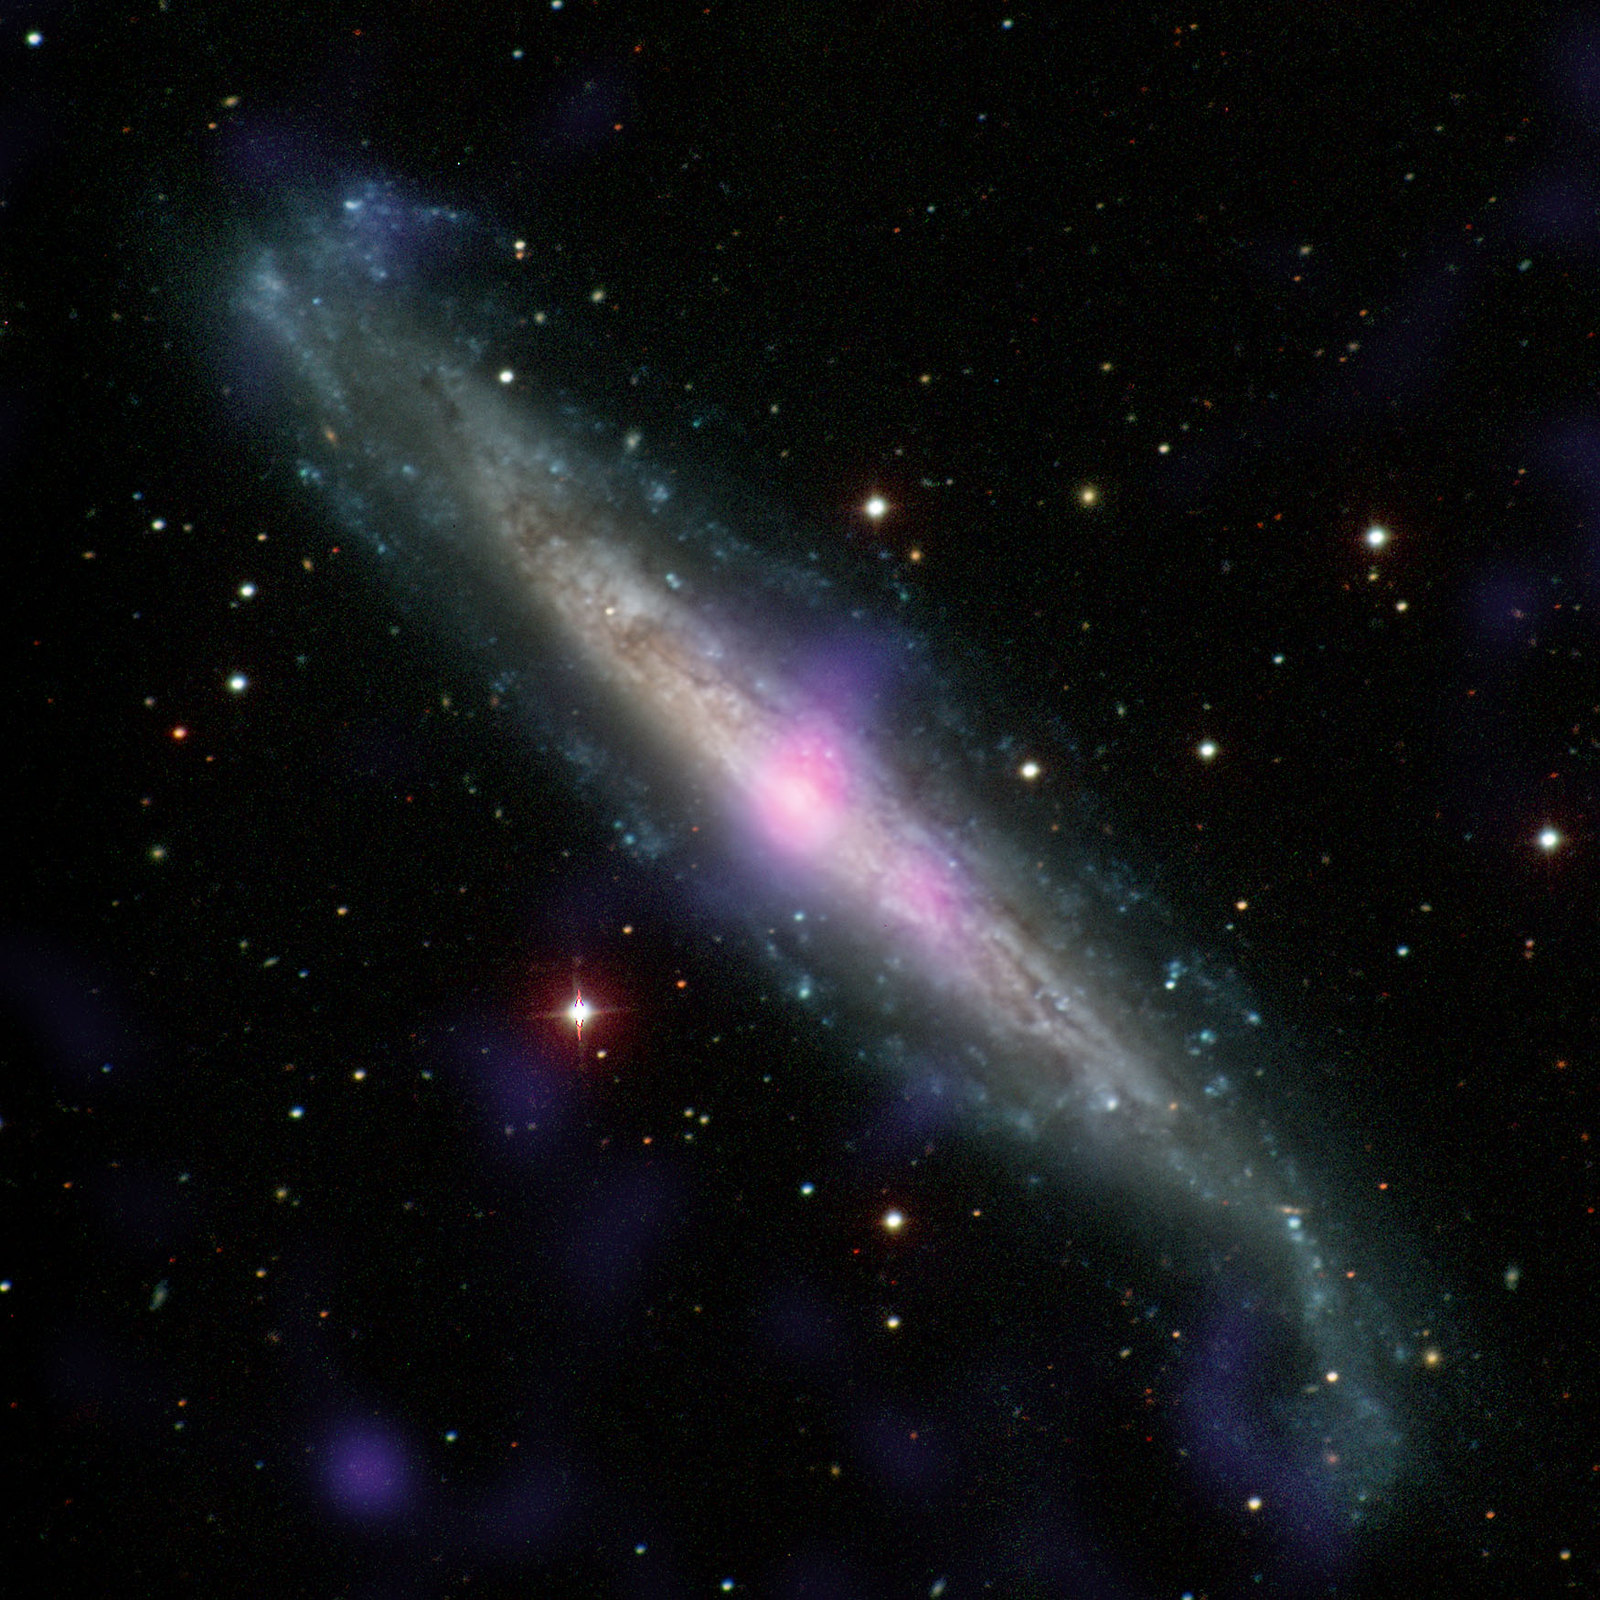 An image of a galaxy with an active galactic nucleus at its center.